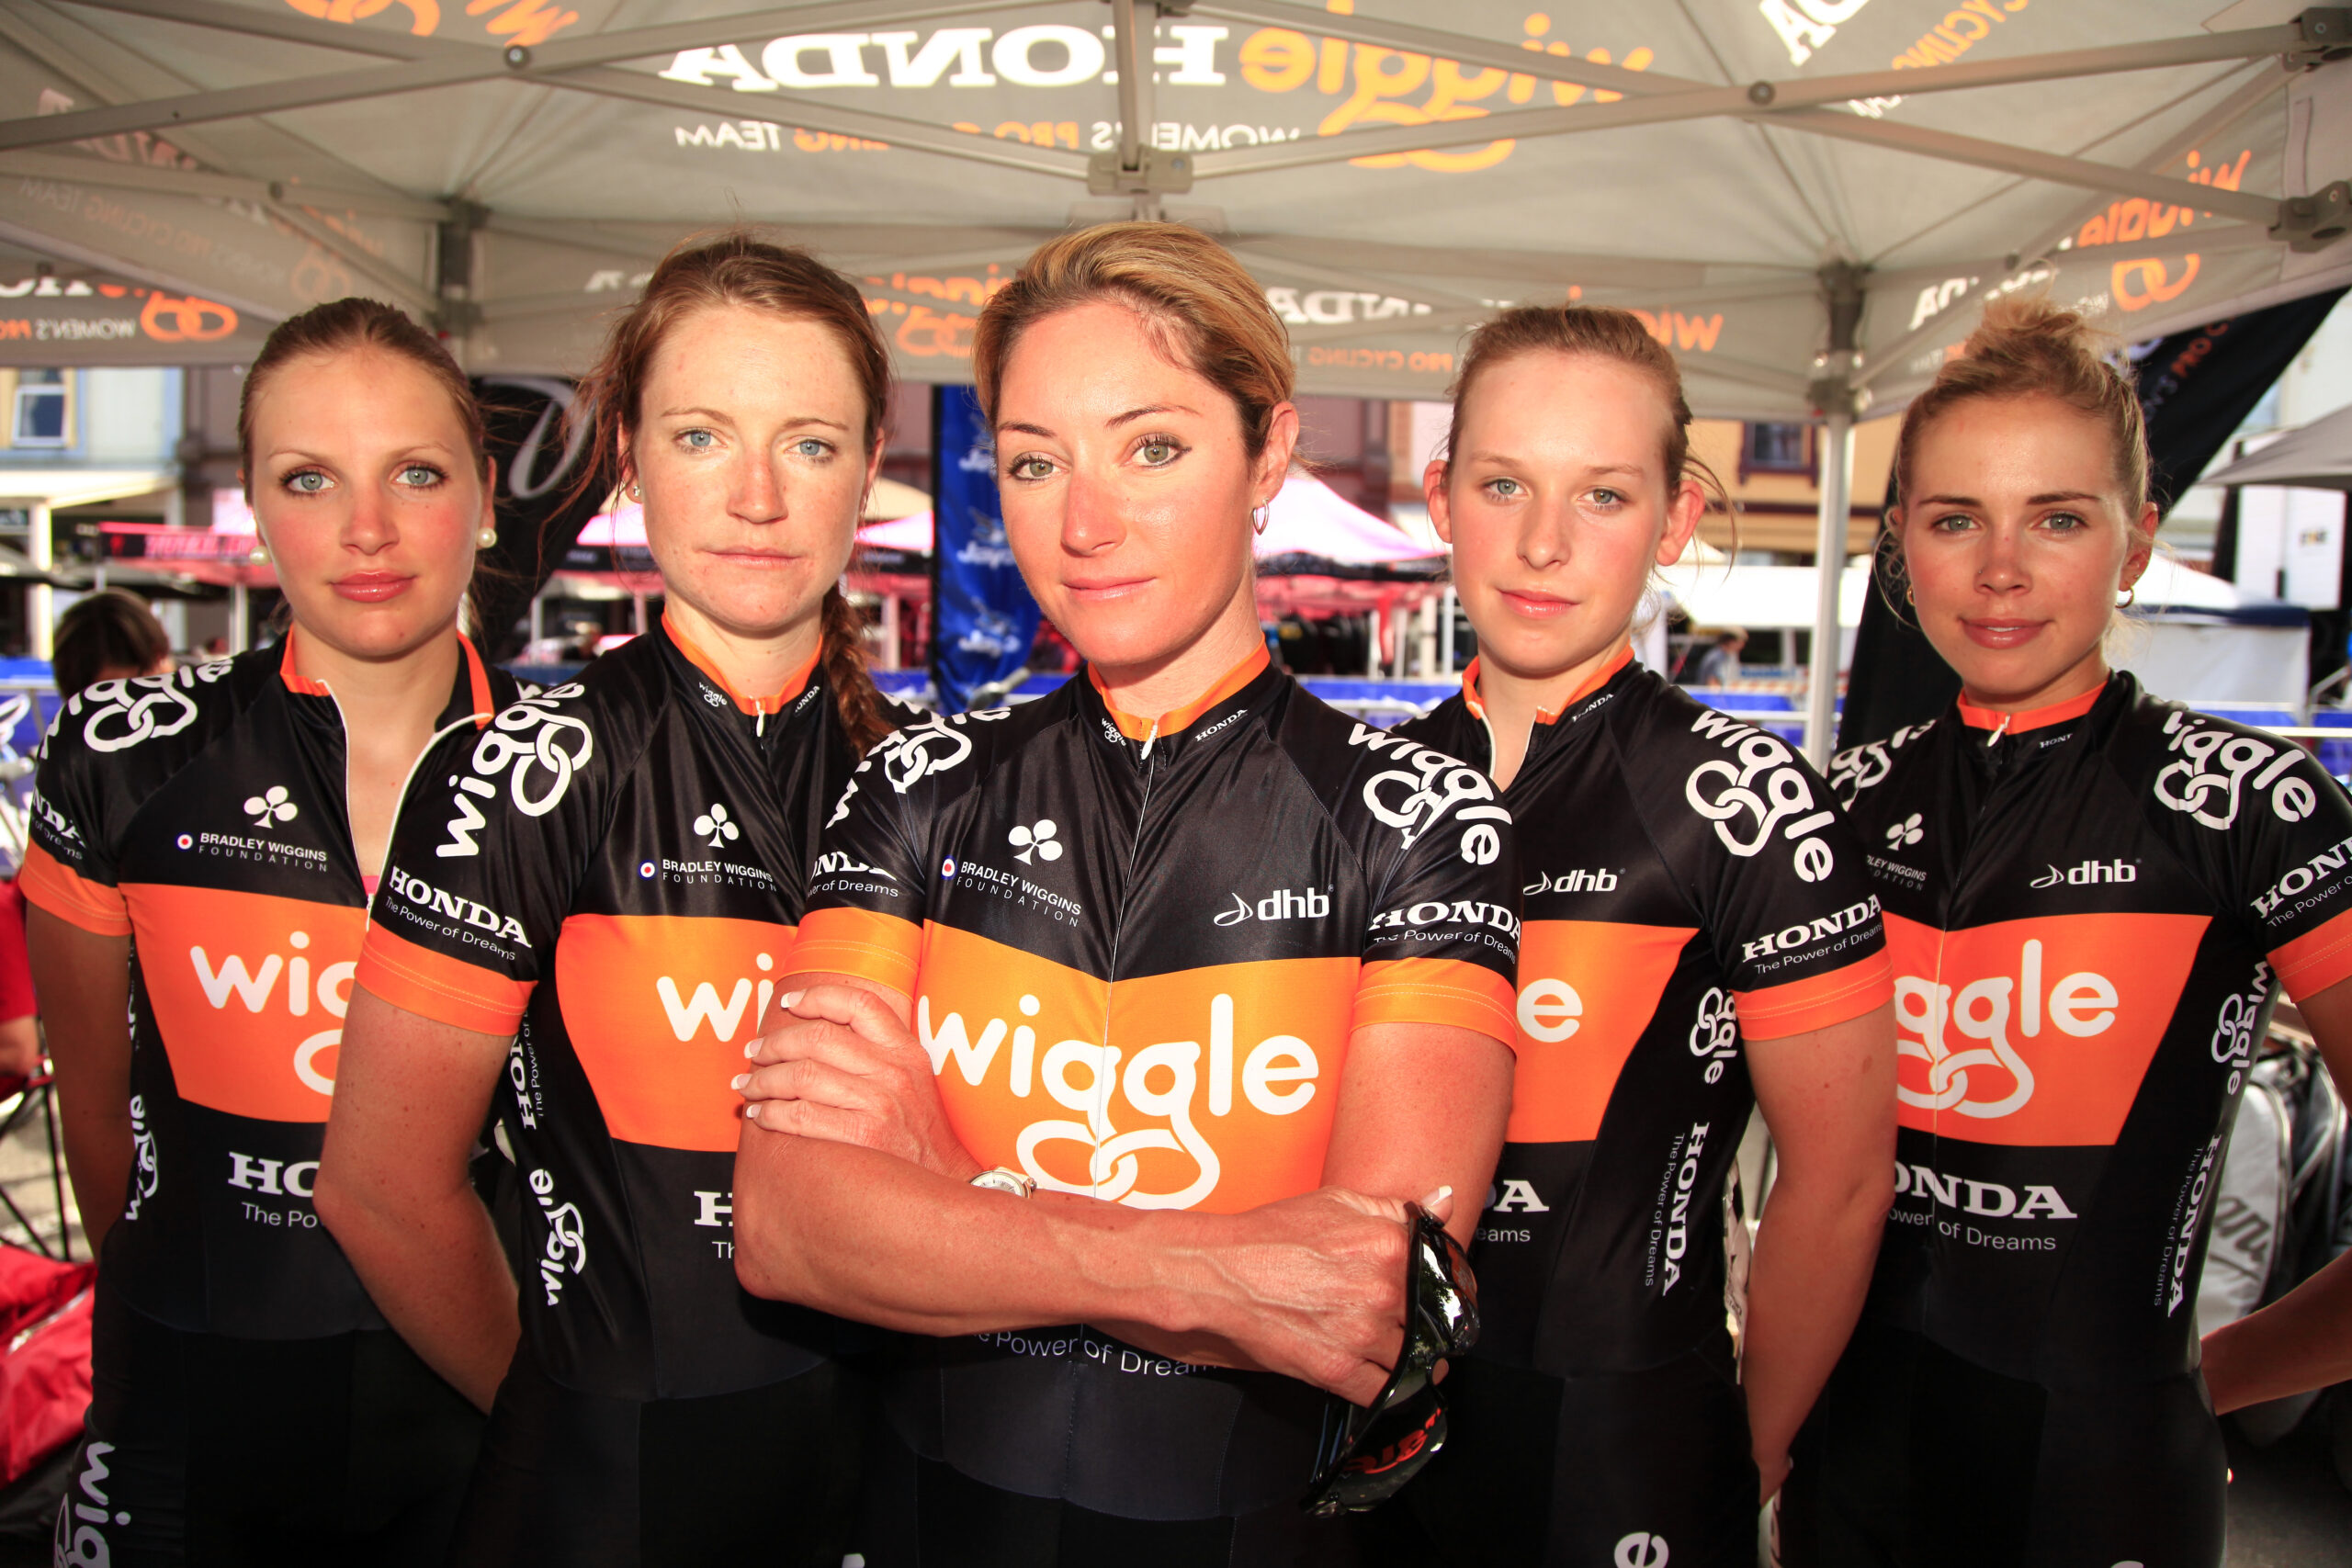 Cyclevox partner with Wiggle Honda Pro Cycling team for video content.